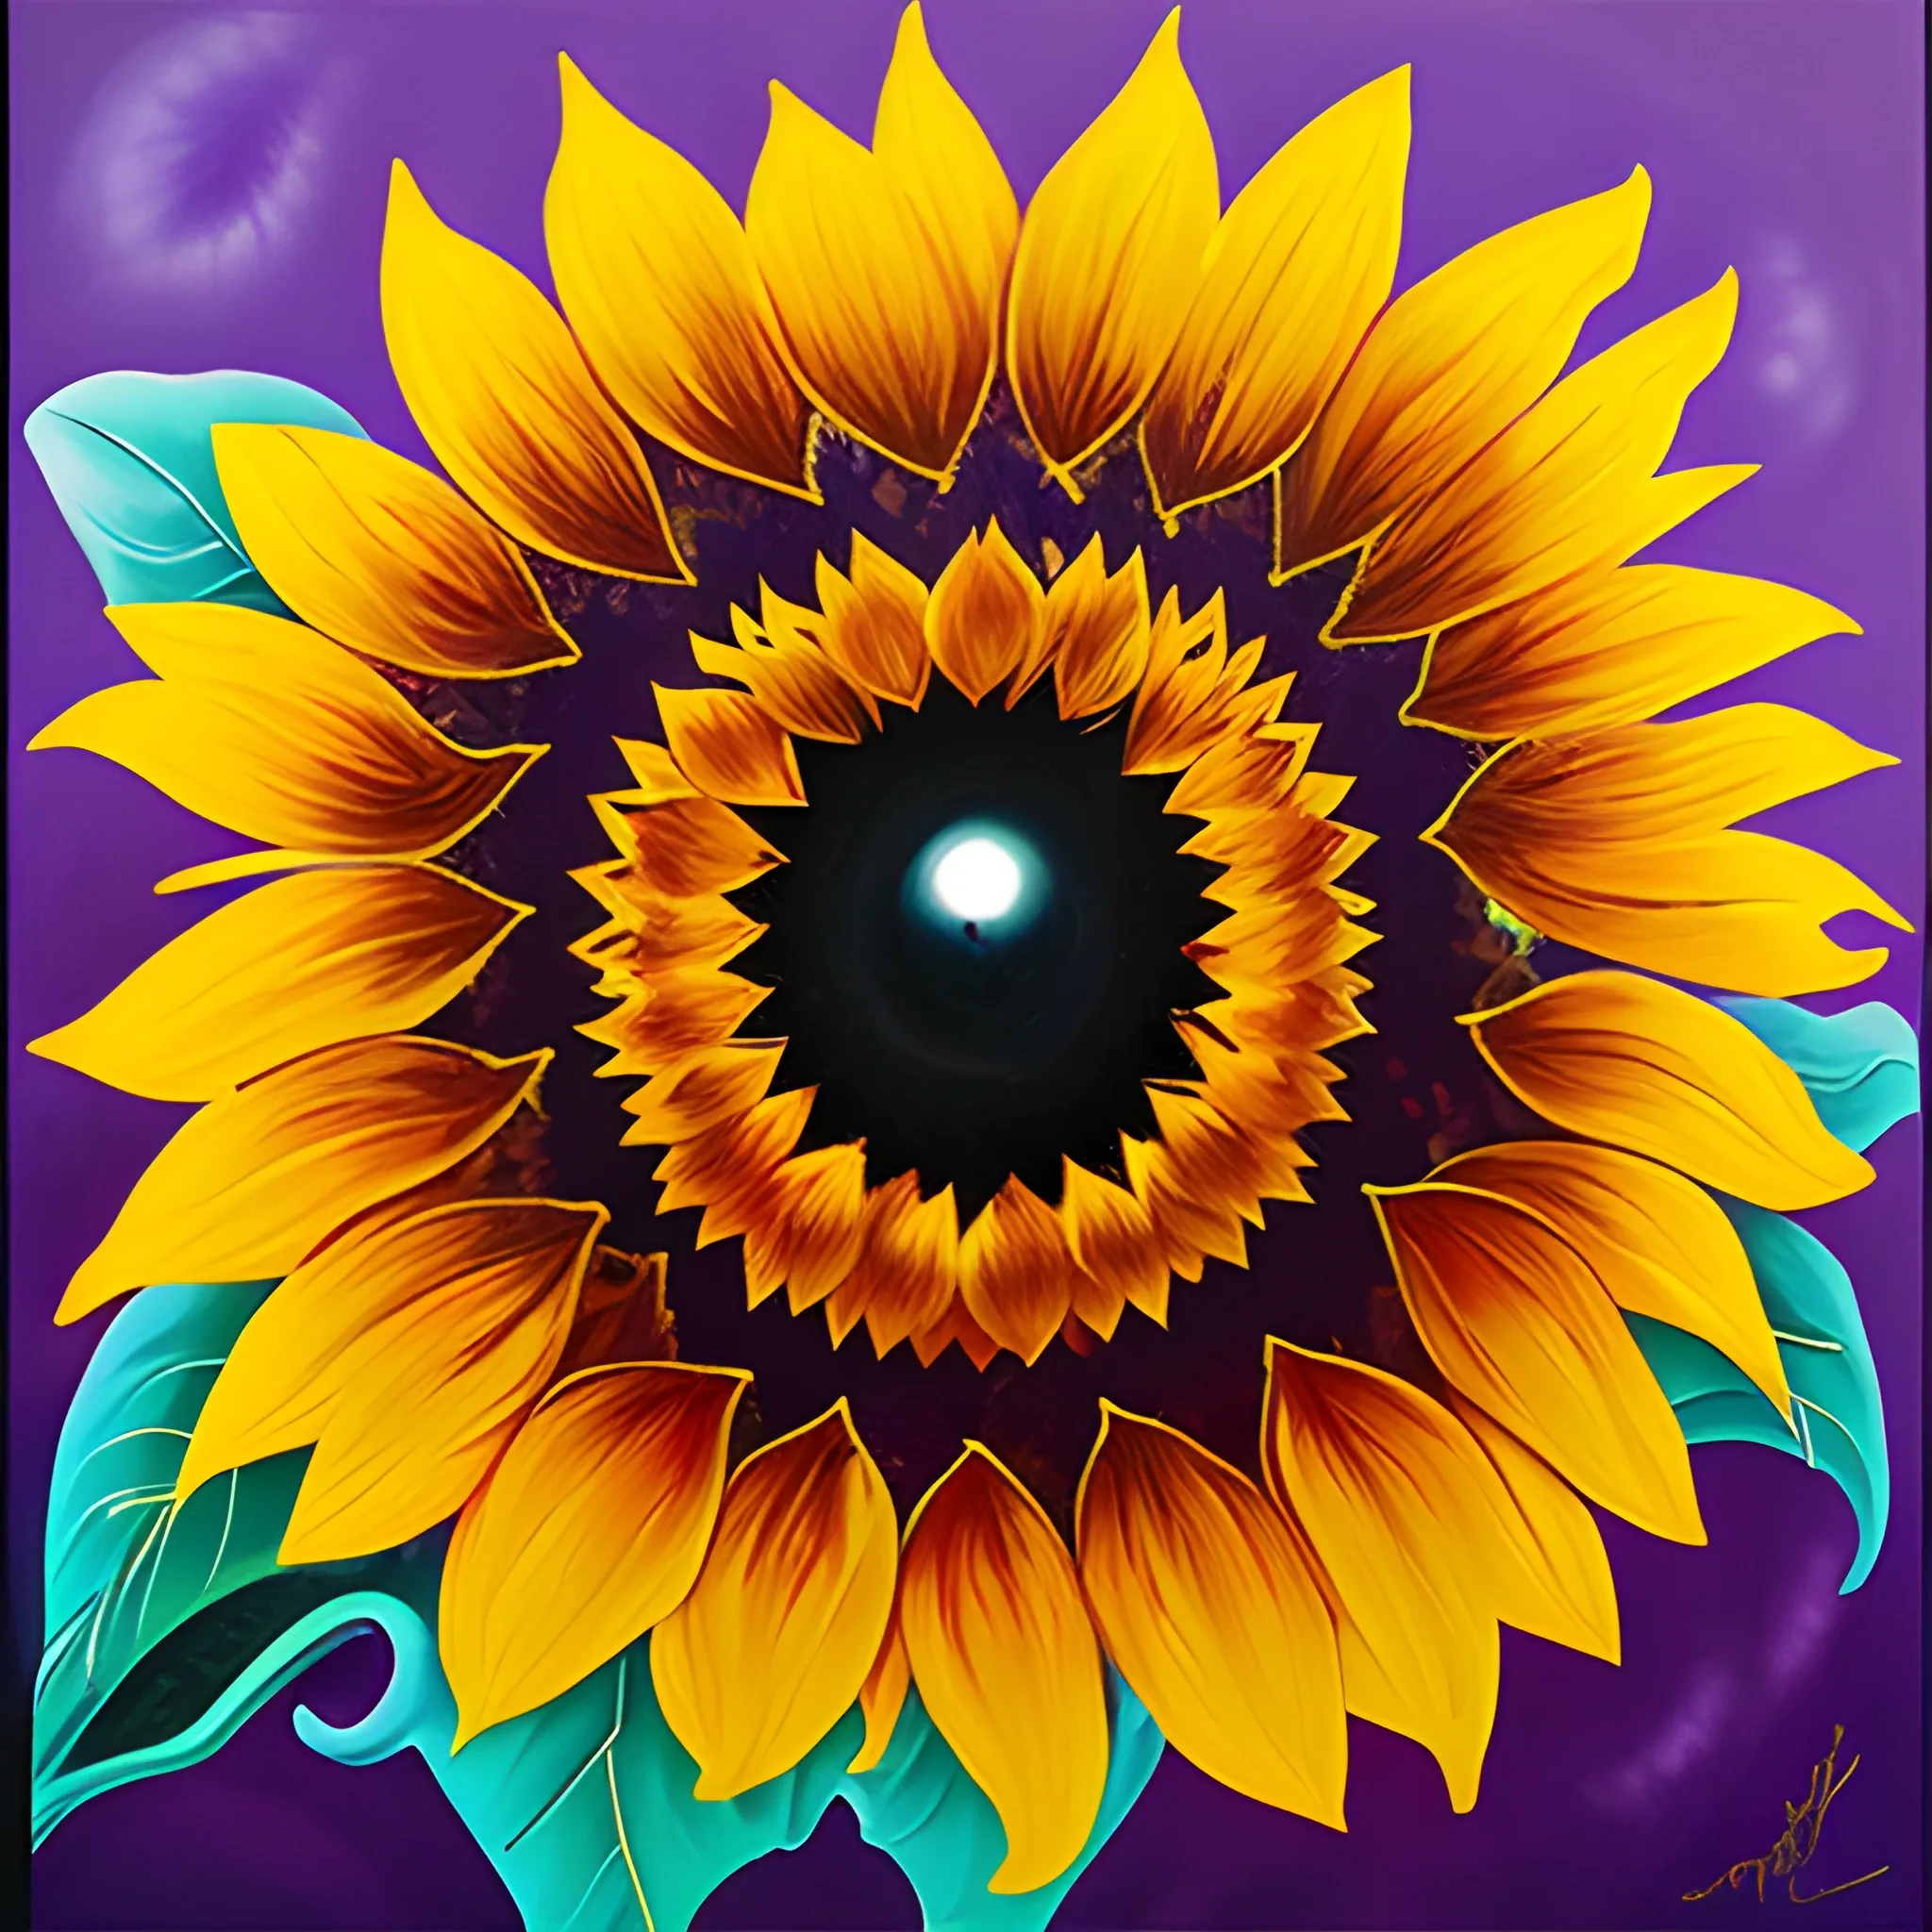 Oil painting style, rich and gorgeous colors, clear layers, yellow, purple, red sunflowers, some are blooming, some are drooping, there is an eye in the center of the sunflower, ultra-high-definition picture quality, Oil Painting